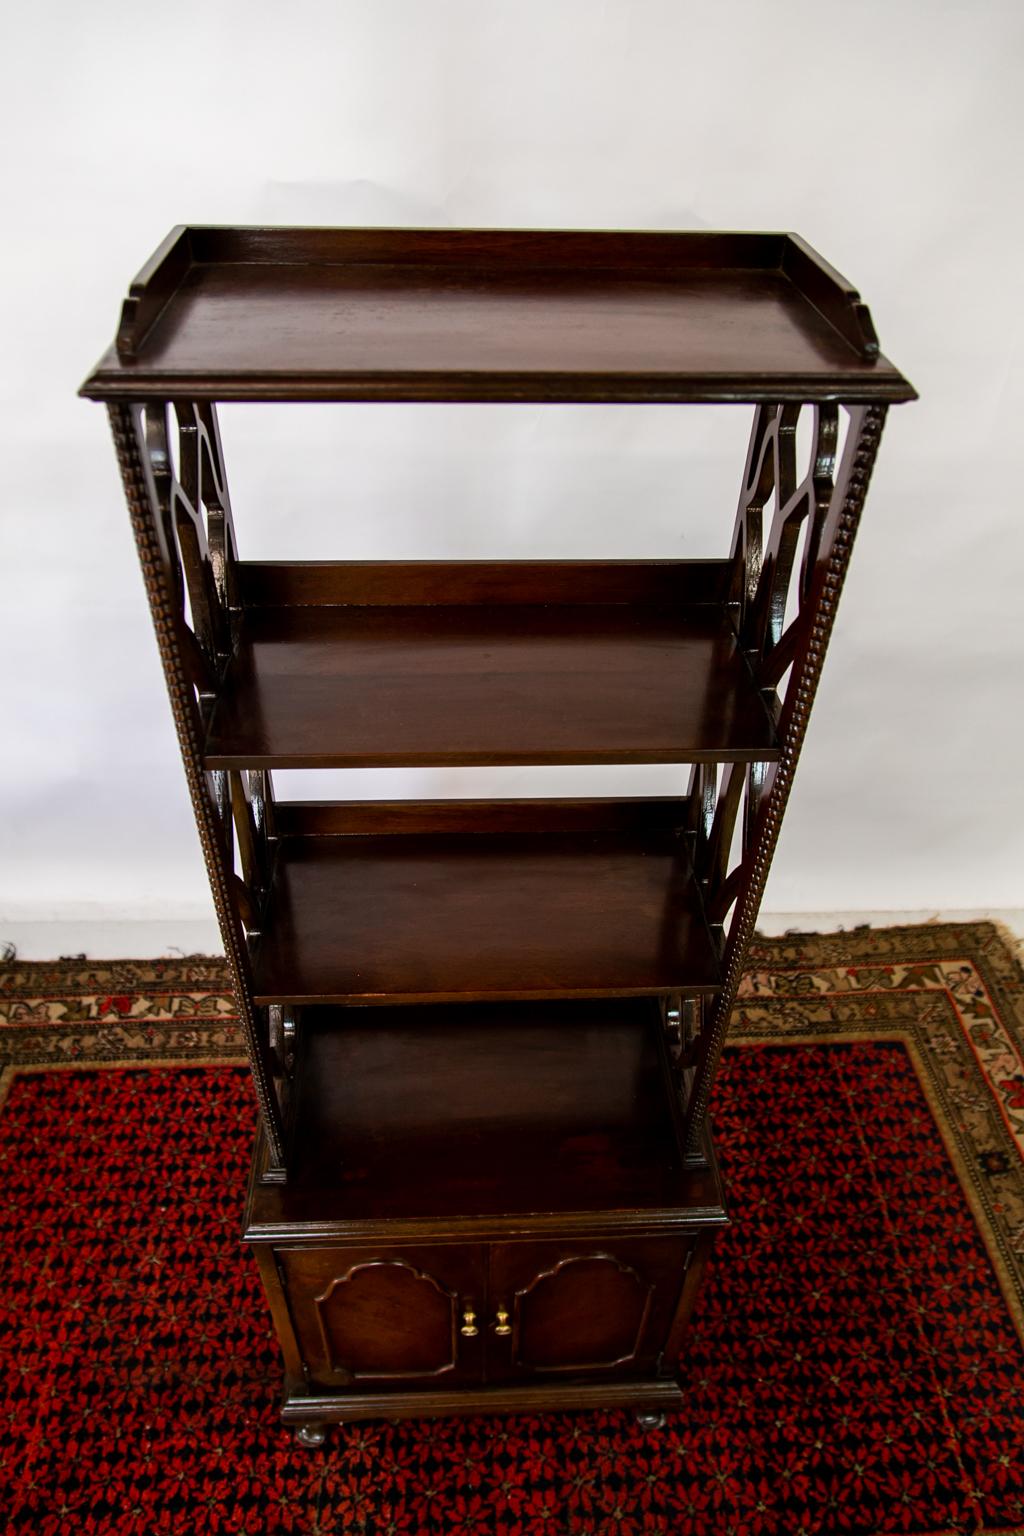 The upper shelf section of this English shelf/ cupboard has open trelliswork side supports. The top has a shaped gallery and molded edge. There is carved beading on the front edge of the side supports.